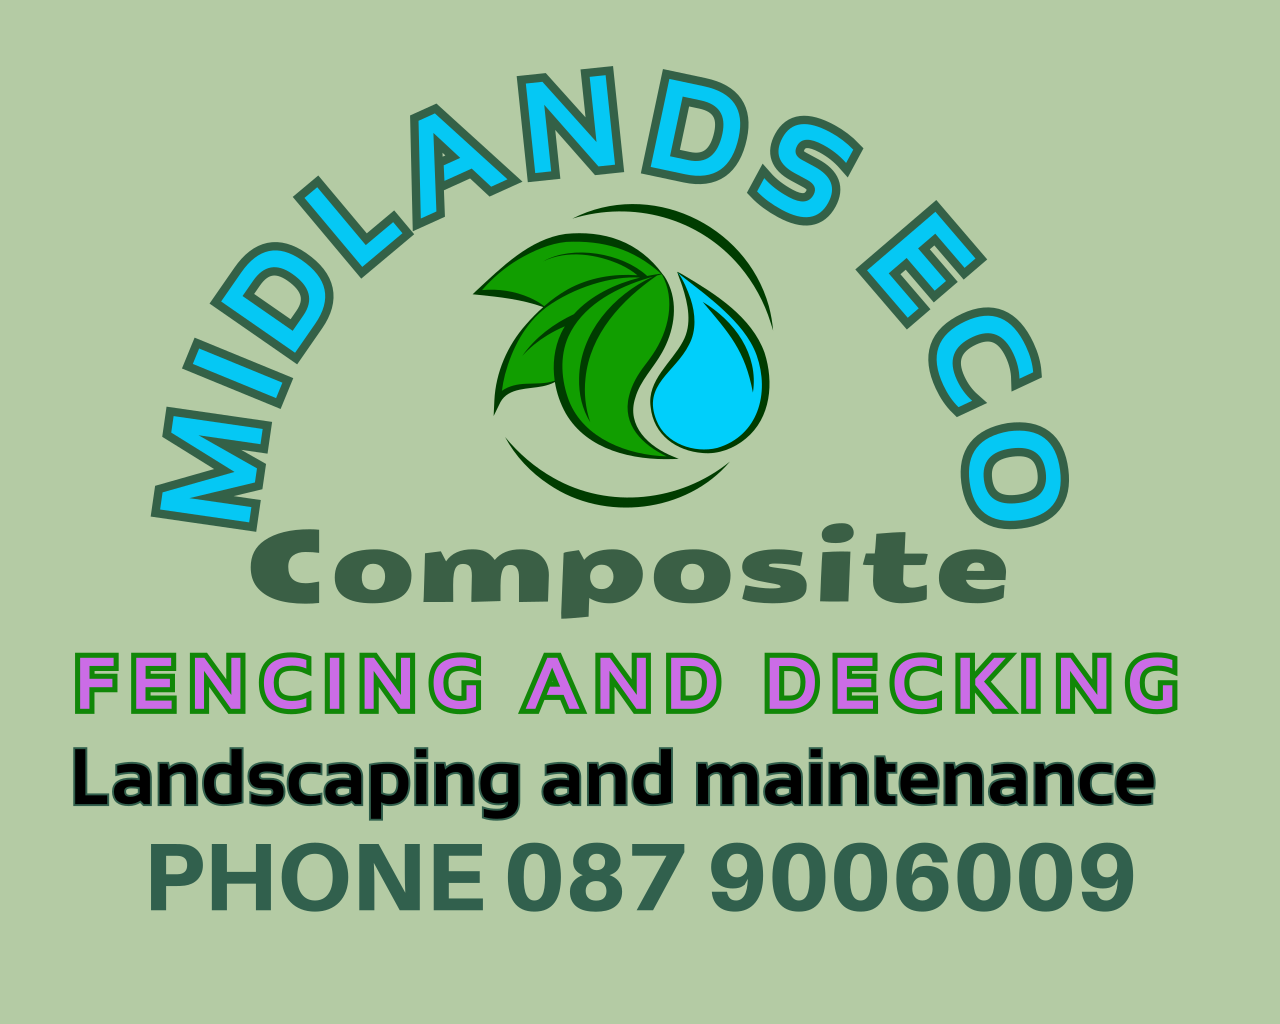 Midlands Eco fencing and decking 's logo